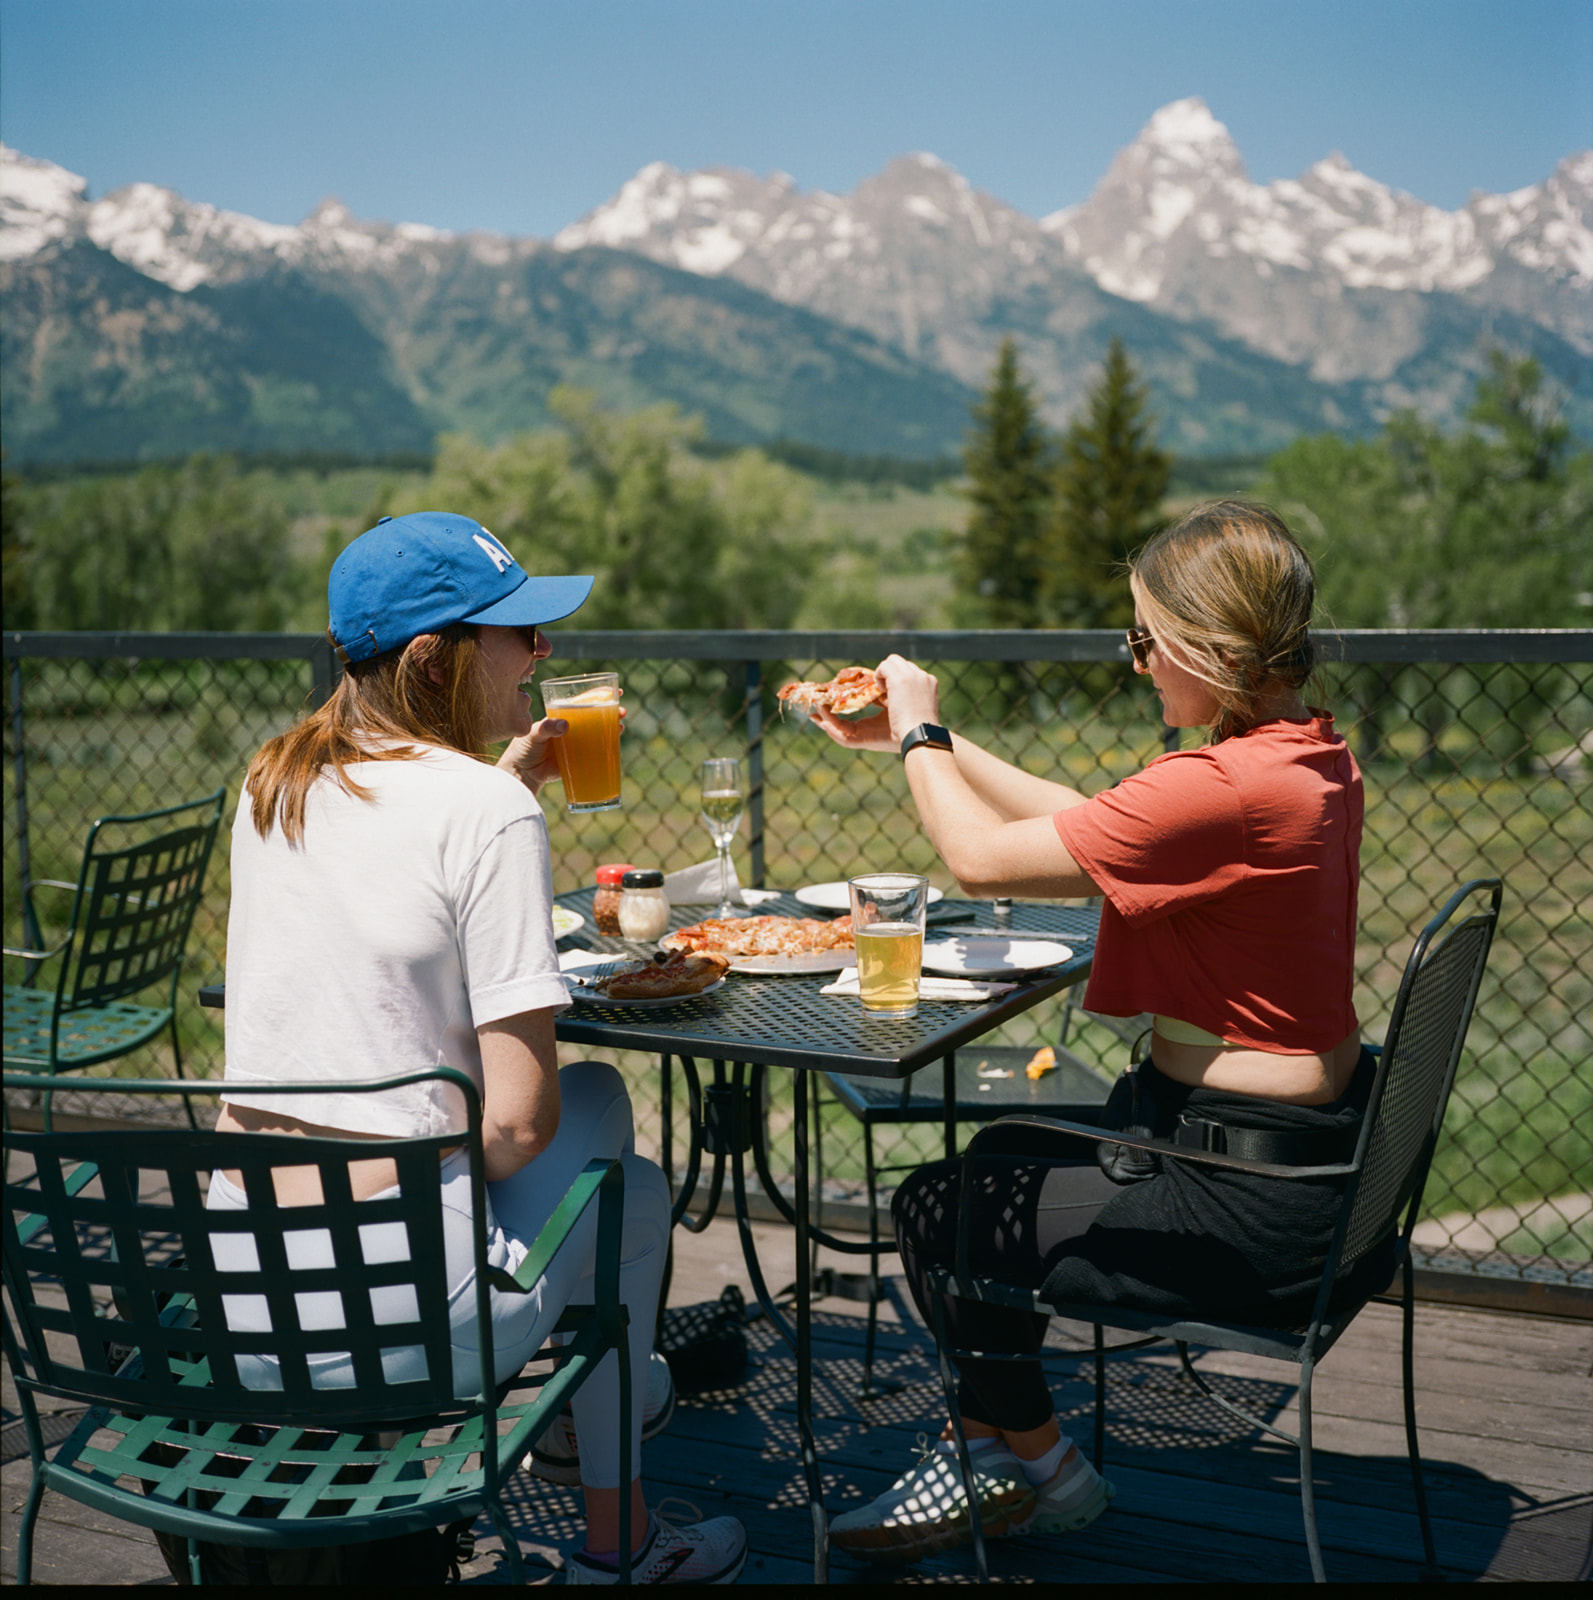 Girls savoring breakfast and cocktails, relishing a wonderful view of trees by the mountain.